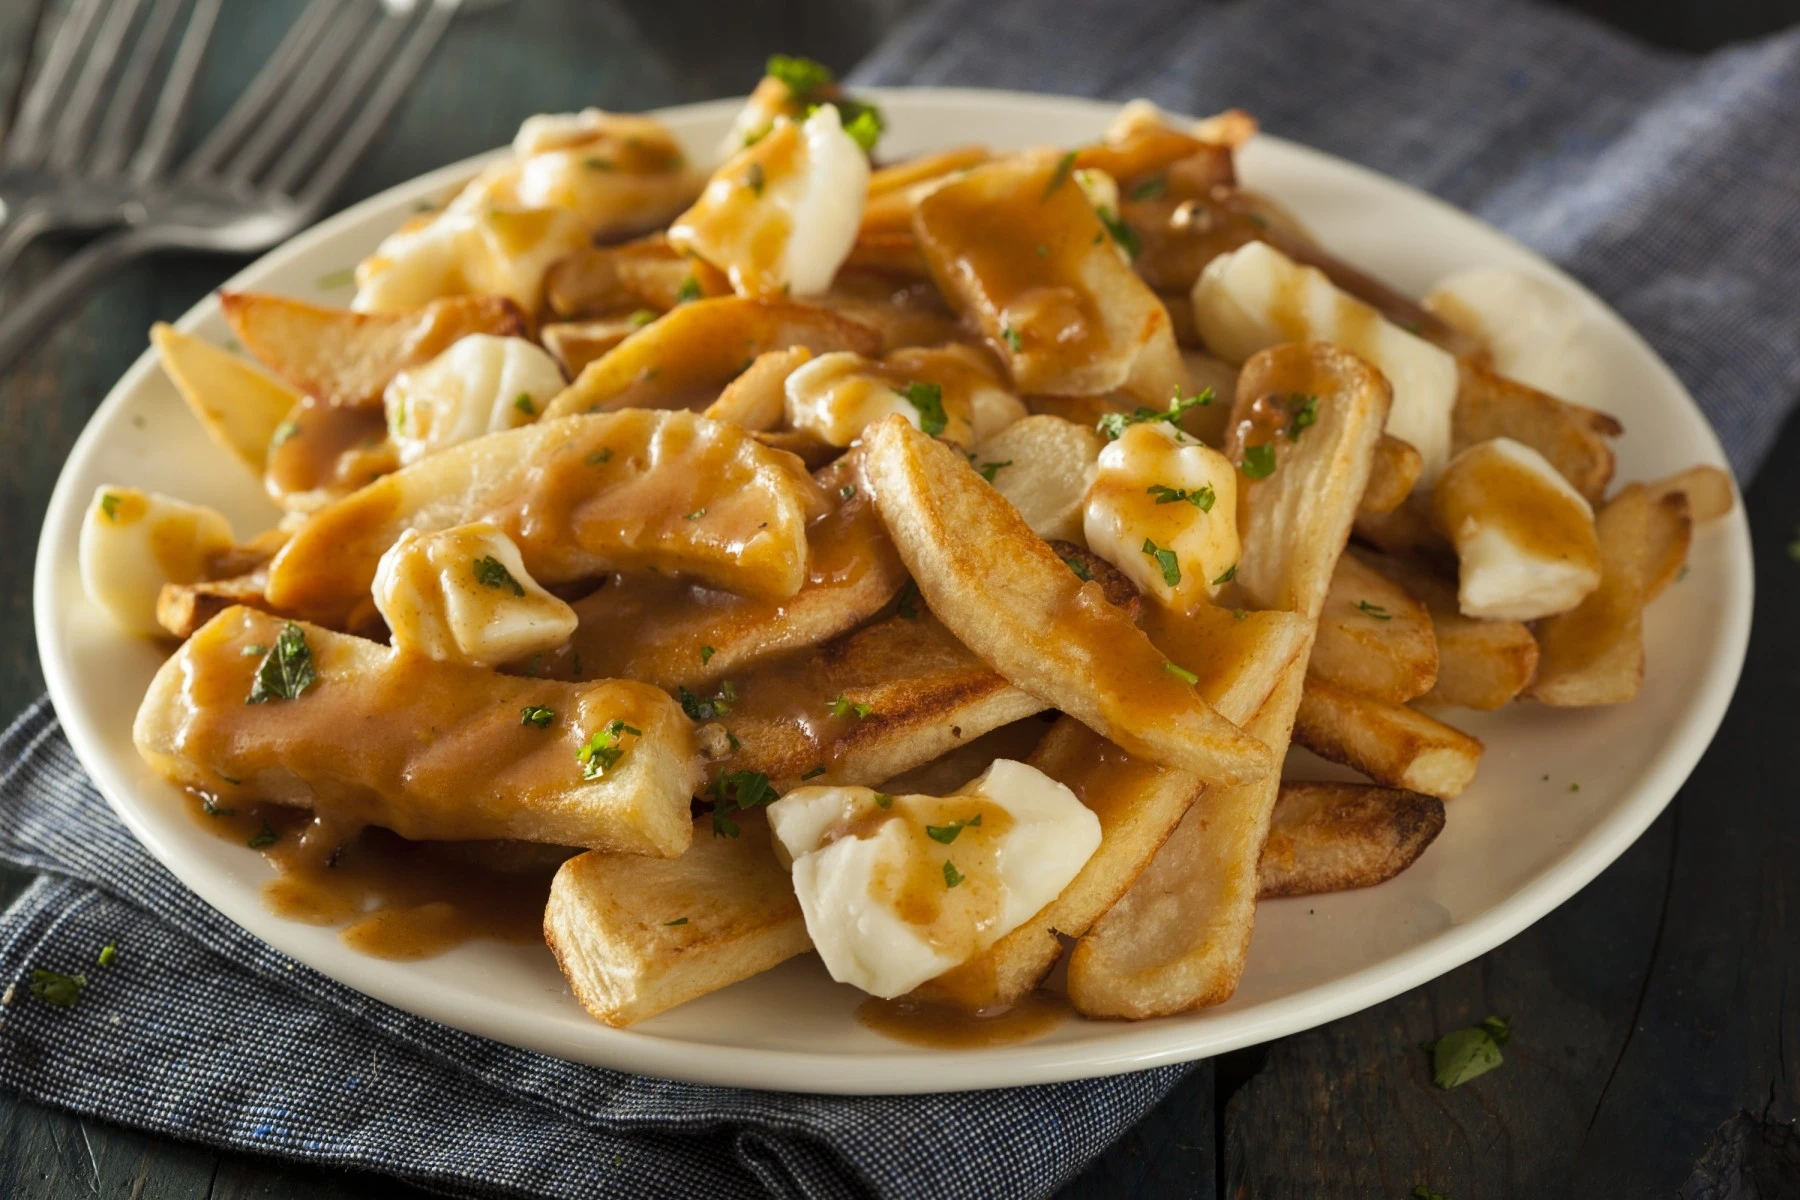 Poutine Canada’s national dish